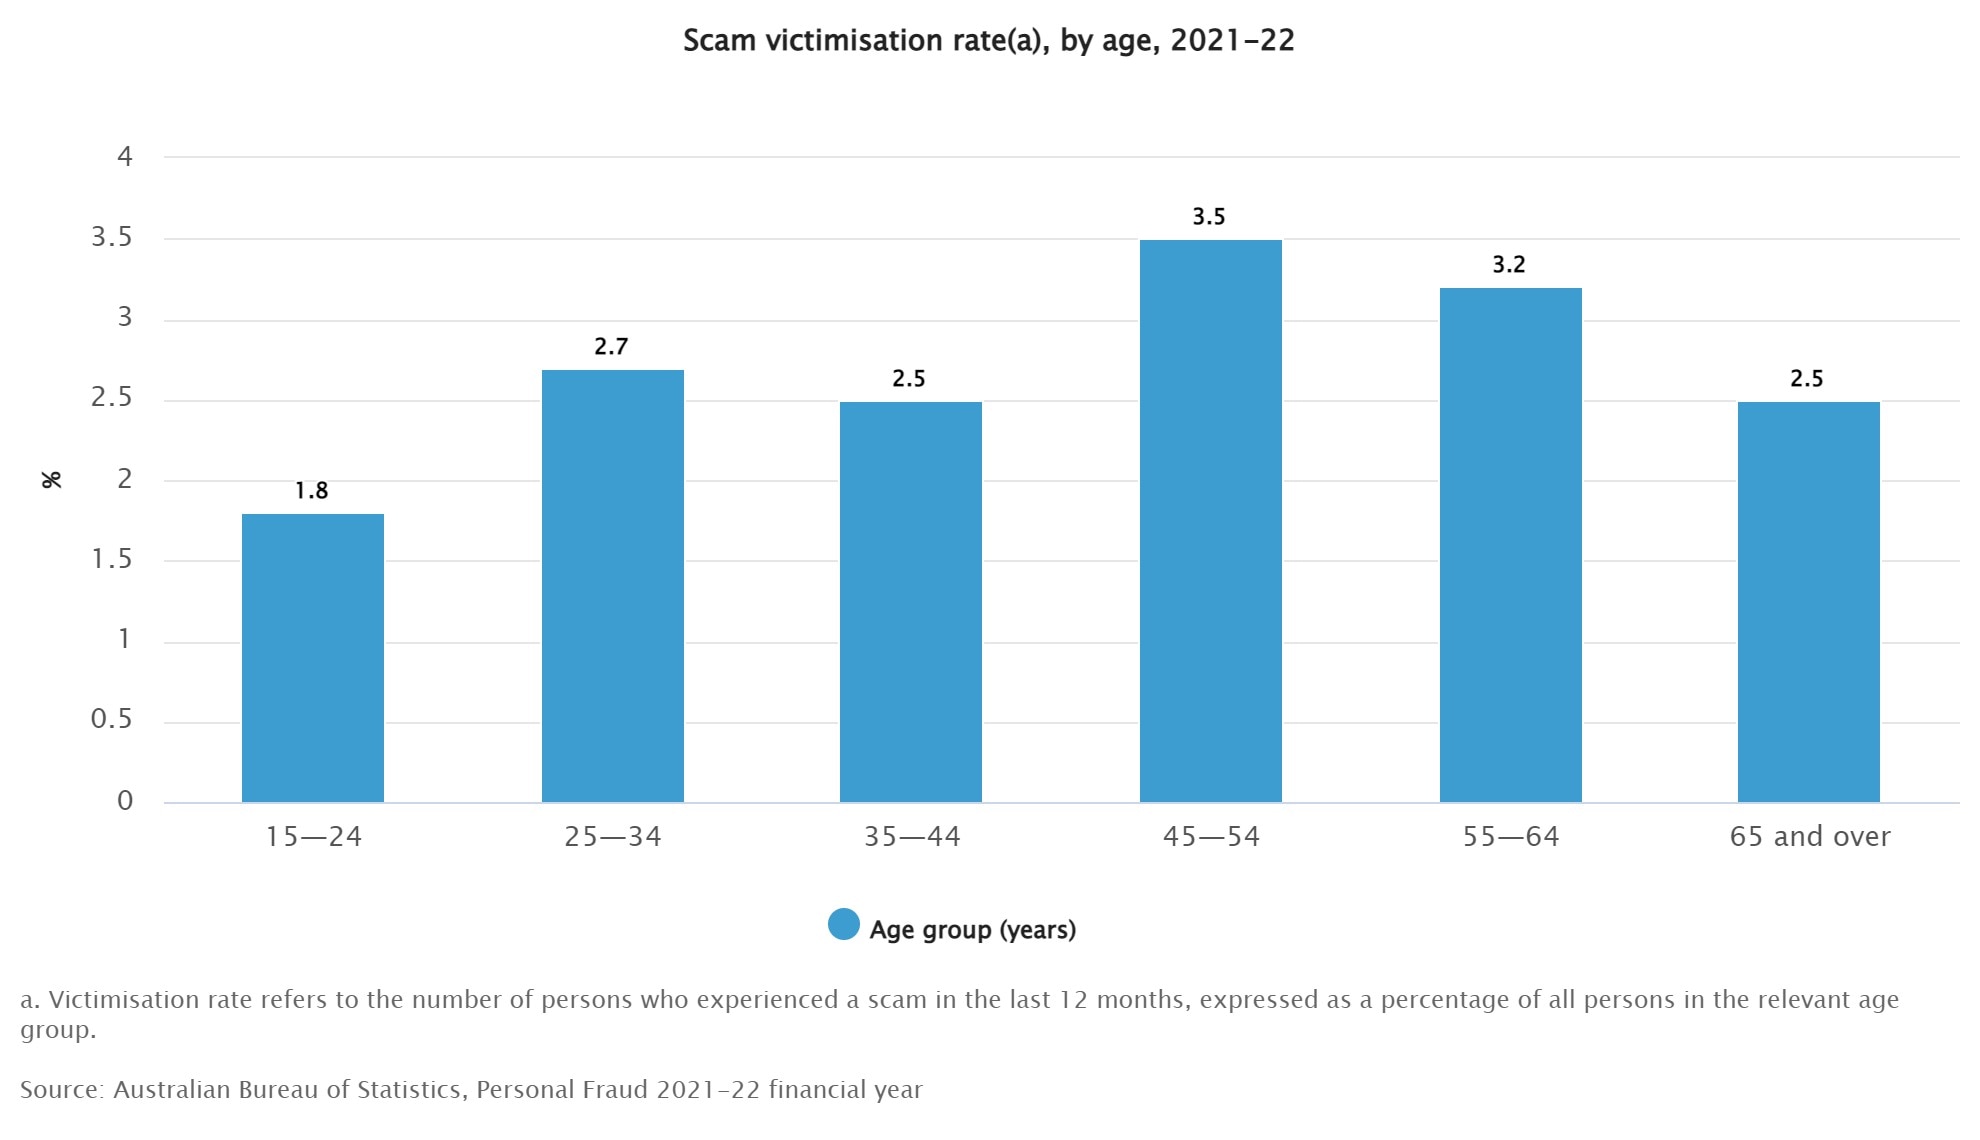 a graph showing the scam victimisation rate across age groups, with 45-54 being the highest, followed by 65+ and 35-44. 